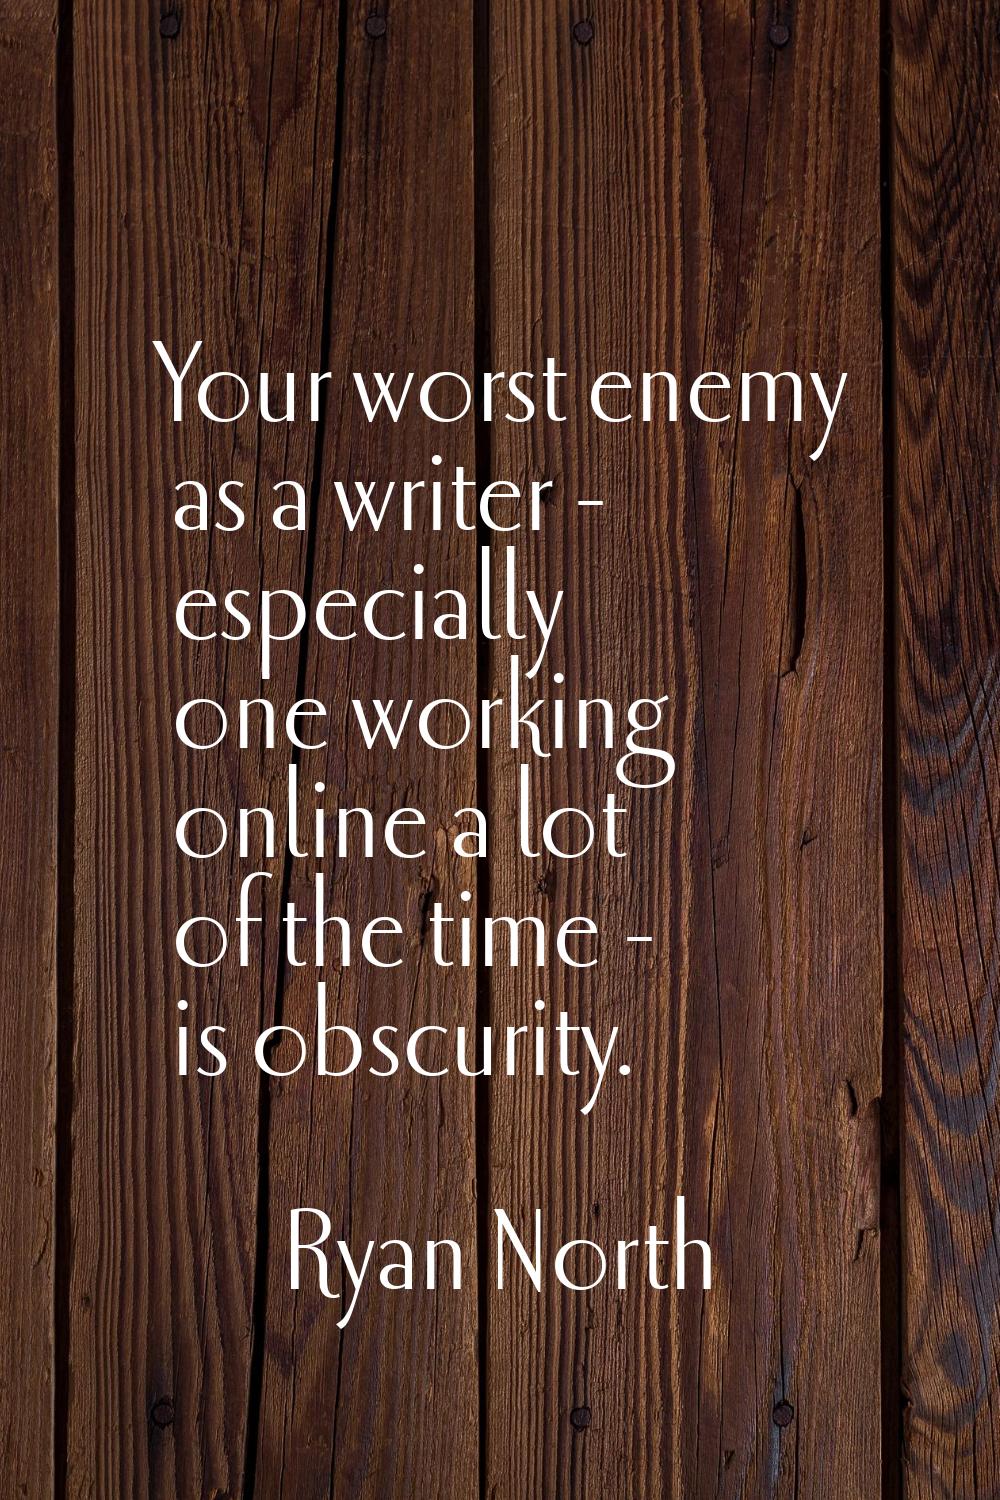 Your worst enemy as a writer - especially one working online a lot of the time - is obscurity.